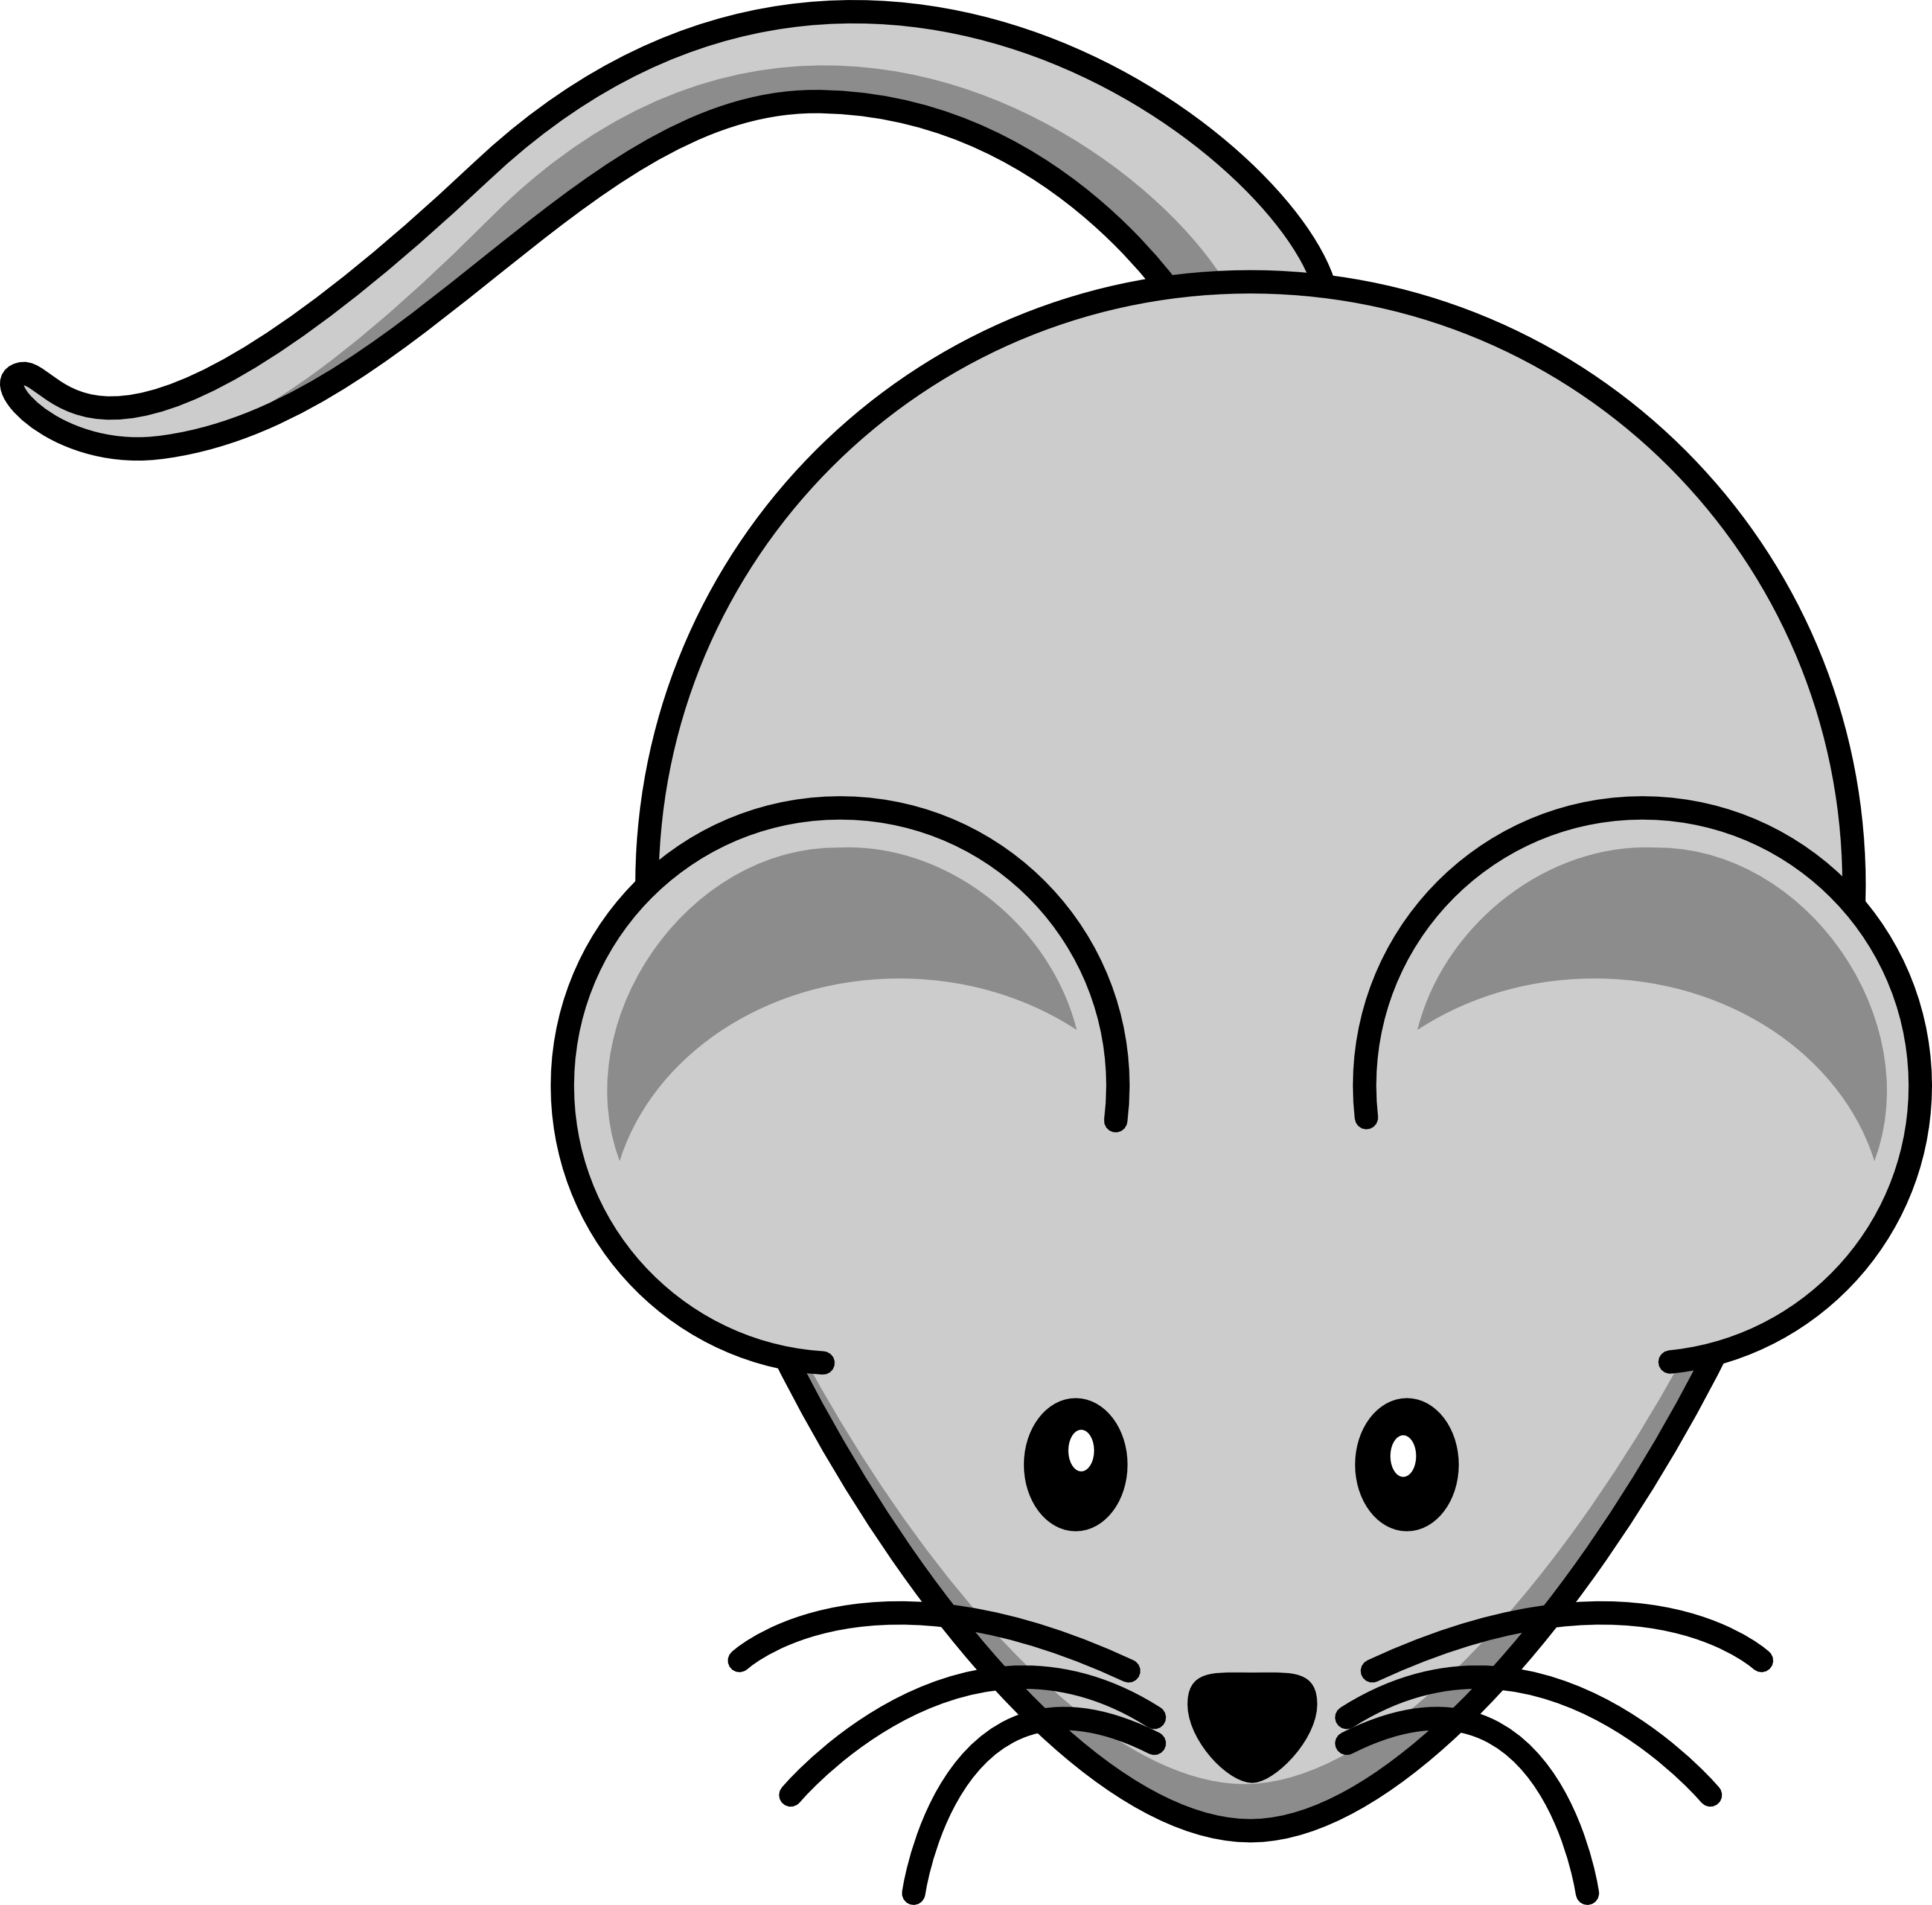 Computer Mouse Clipart Black And White | Clipart Panda - Free ...